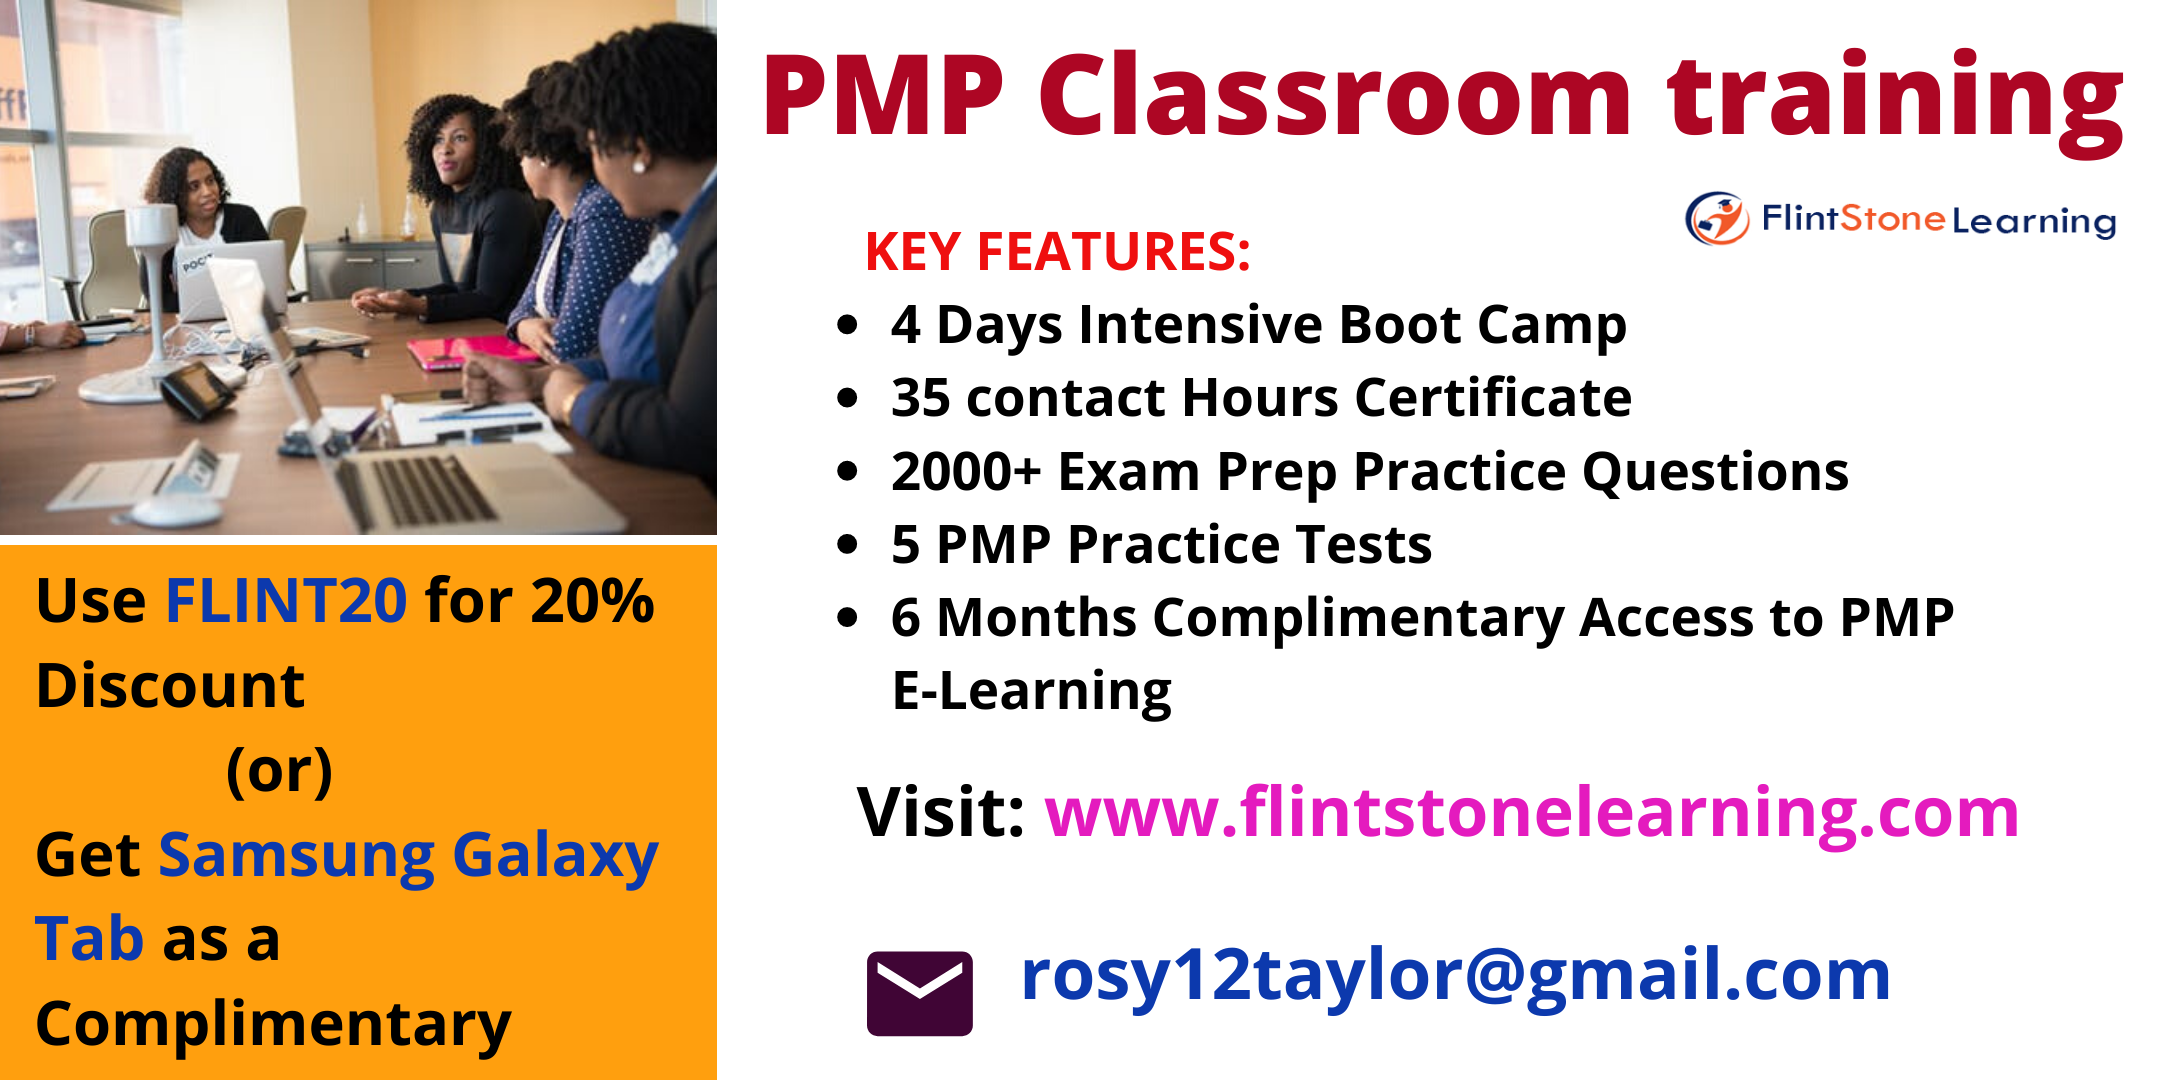 PMP Certification Training in AnnArbor, MI